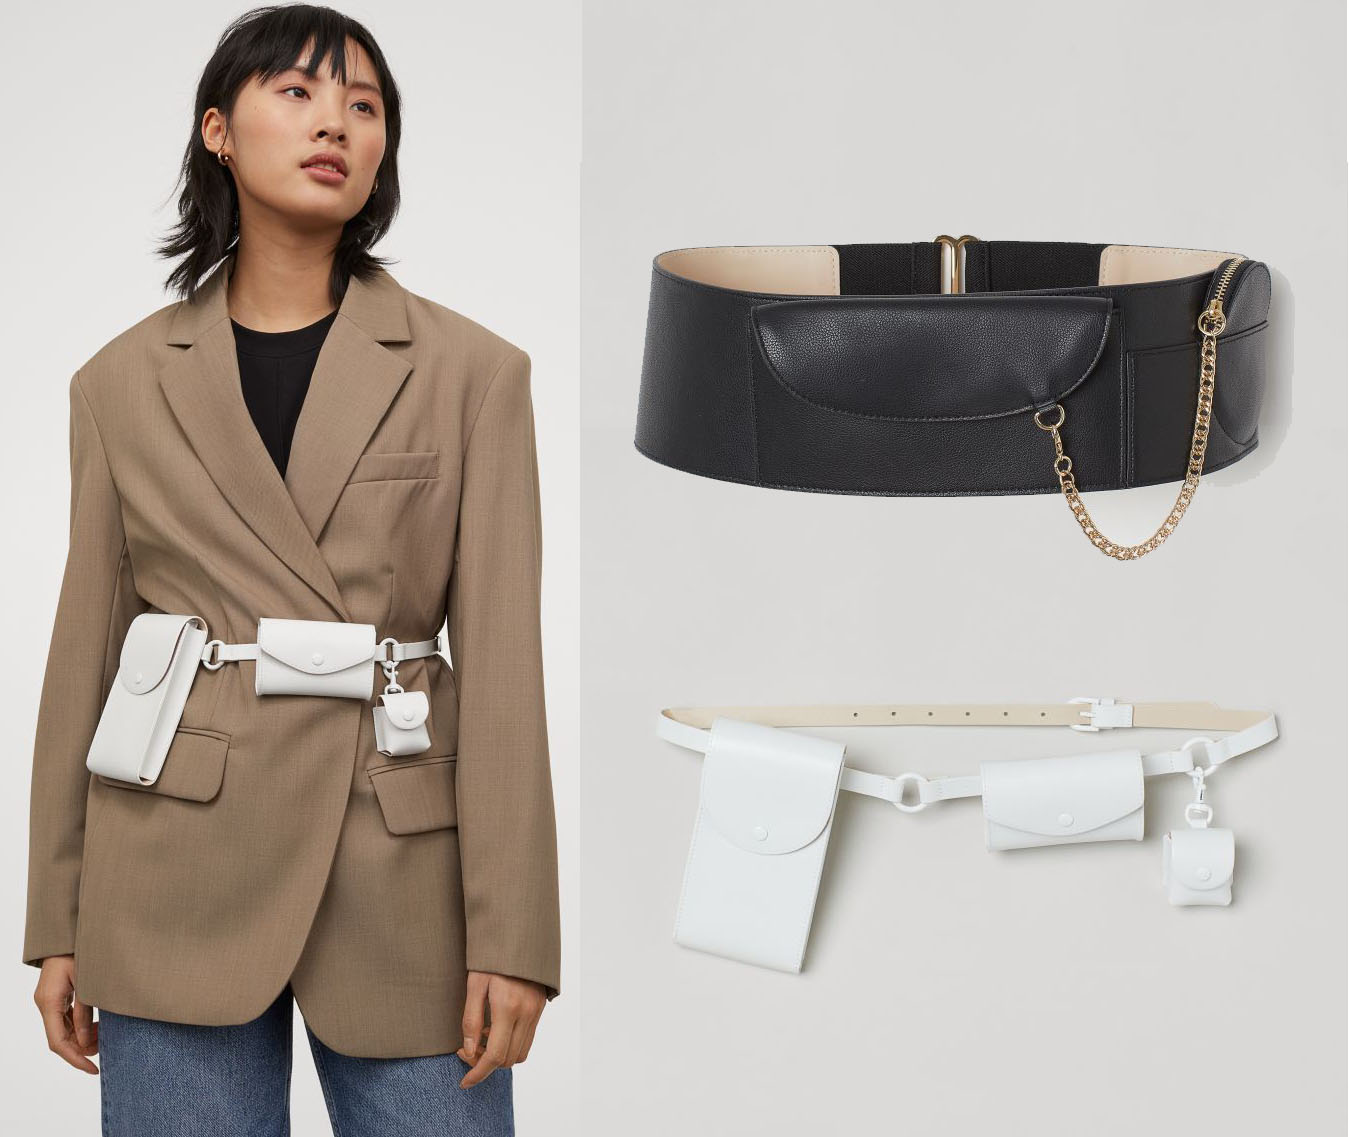 An interesting take on classic belt bags, H&M's Waist Belt Bag is a simple belt with multiple pockets for your essentials